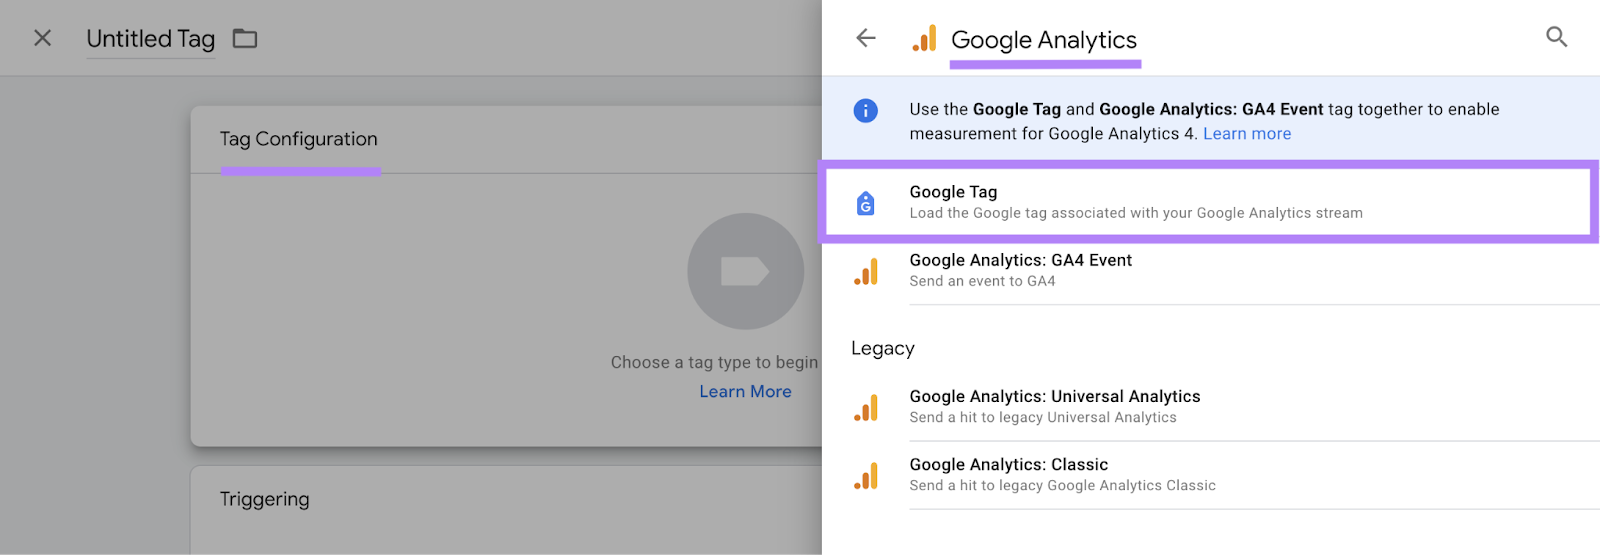 “Tag Configuration” > “Google Analytics” > “Google Tag" buttons highlighted